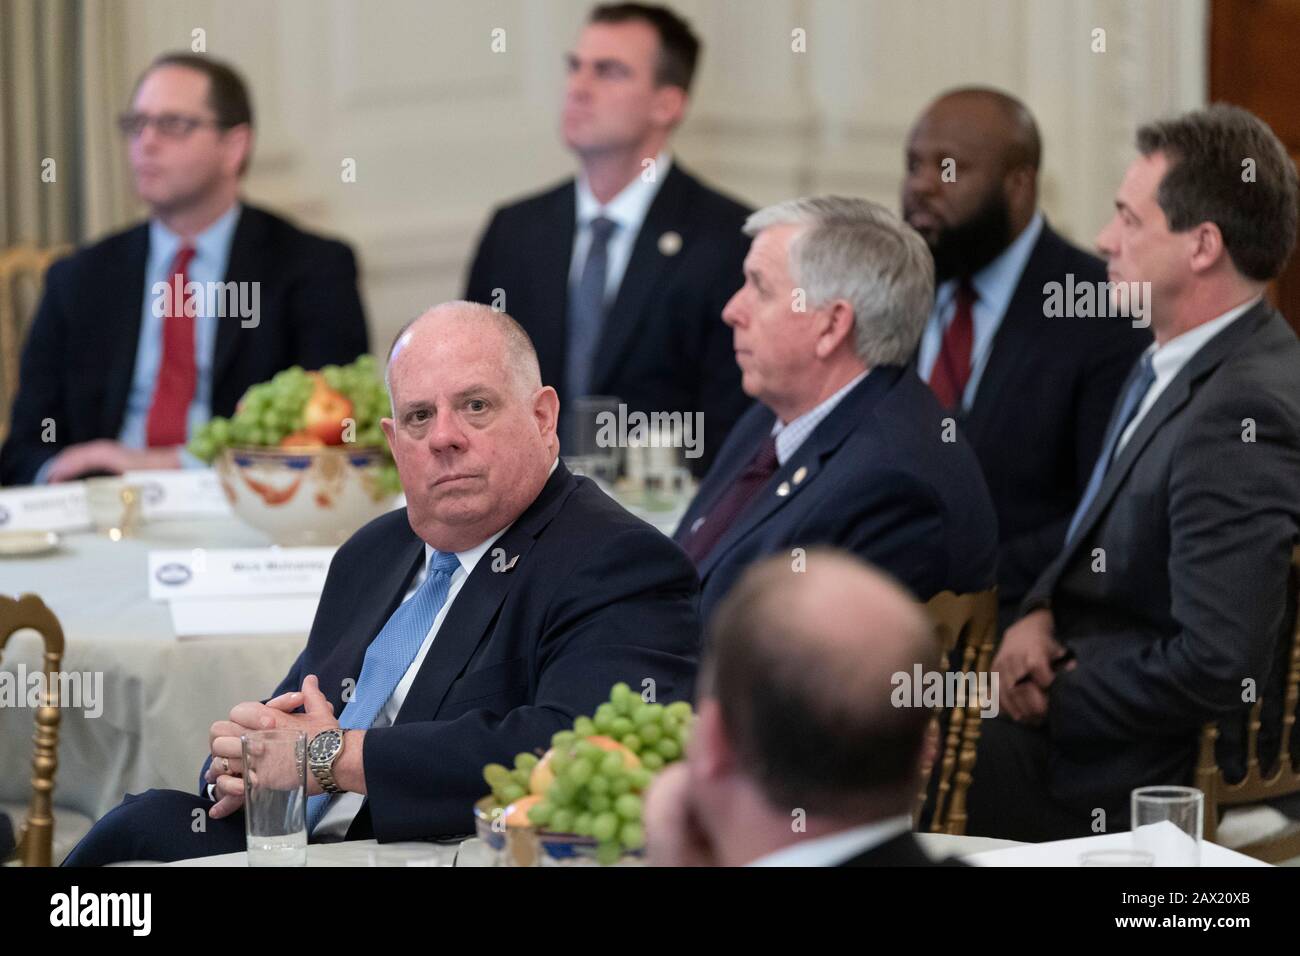 Maryland's Governor Larry Hogan(R) listens as United States President Donald J. Trump makes remarks at the White House Business Session with governors at the White House in Washington, DC during the National Governor's Association meetings. Credit: Chris Kleponis/Pool via CNP | usage worldwide Stock Photo